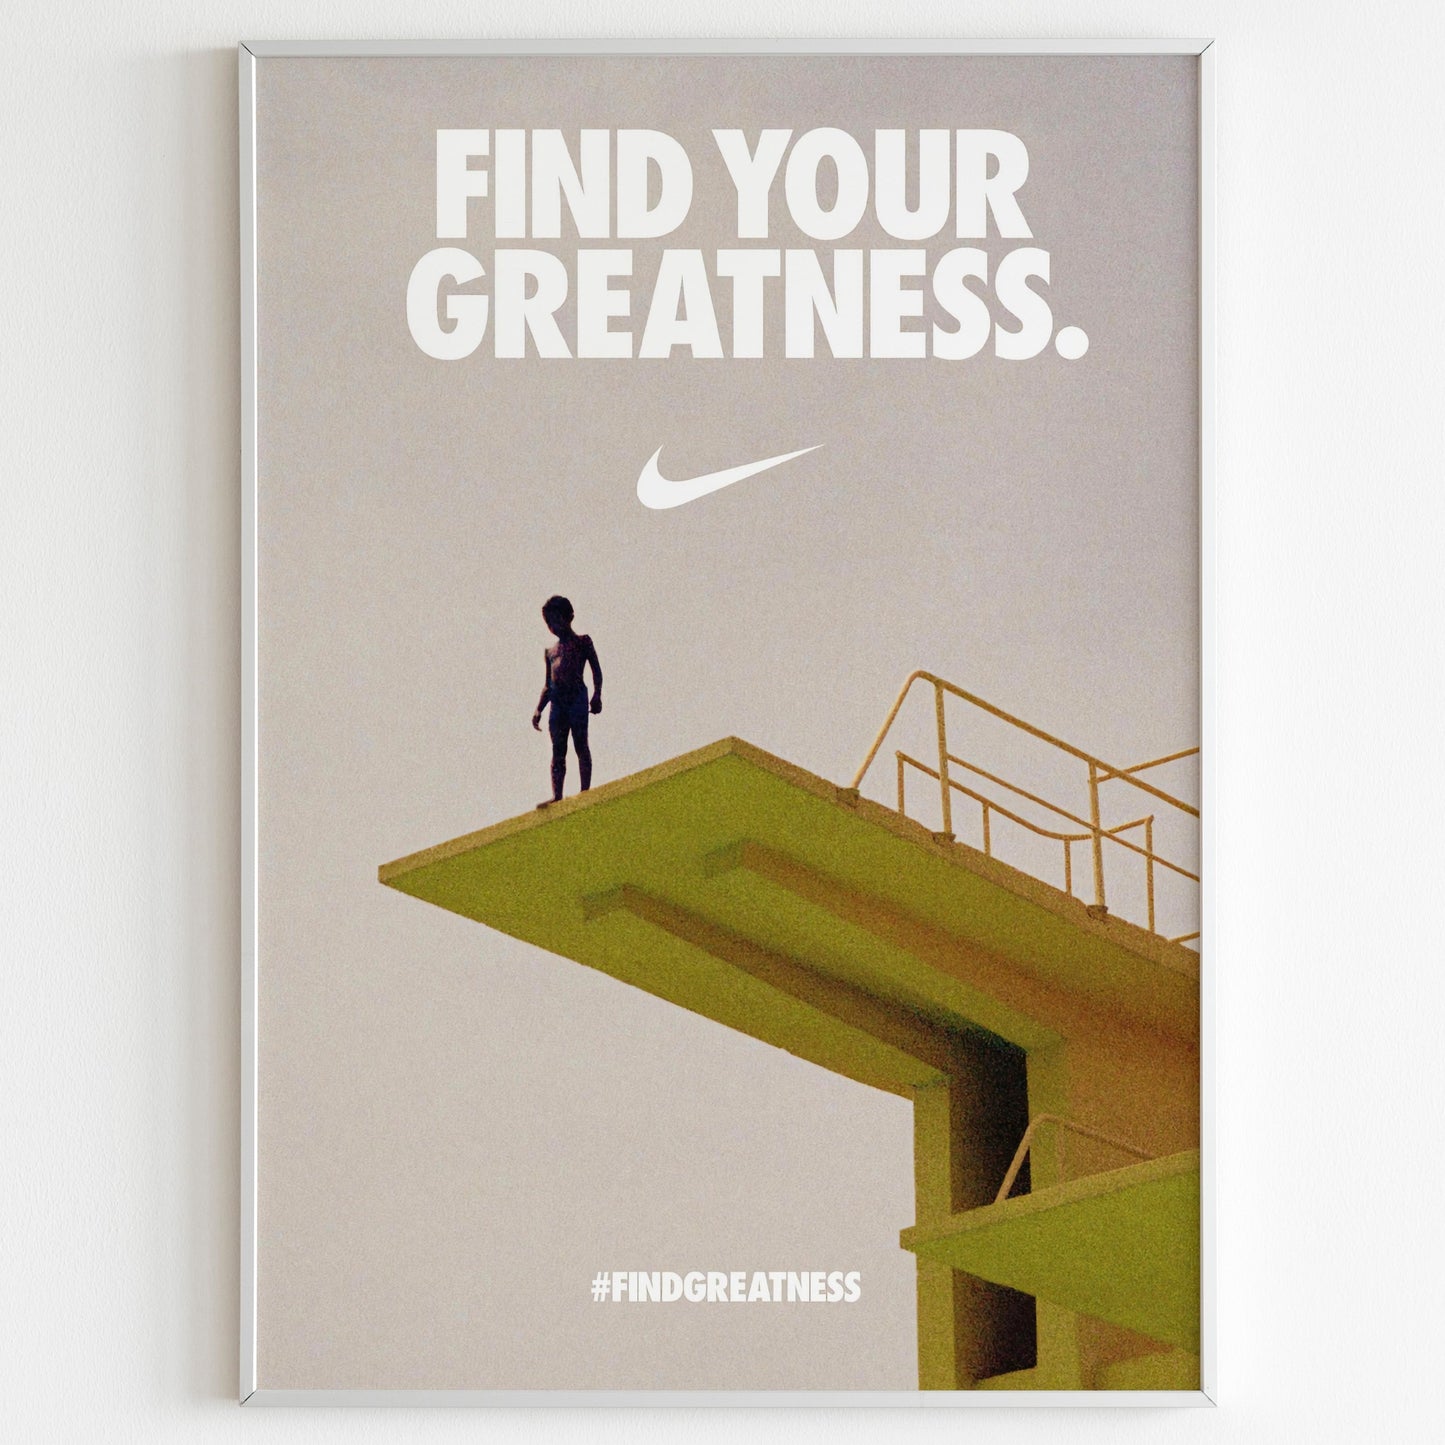 Nike "Find Your Greatness" Advertising Poster, Ad Style Print, Vintage Ad Wall Art, Magazine Retro Advertisement